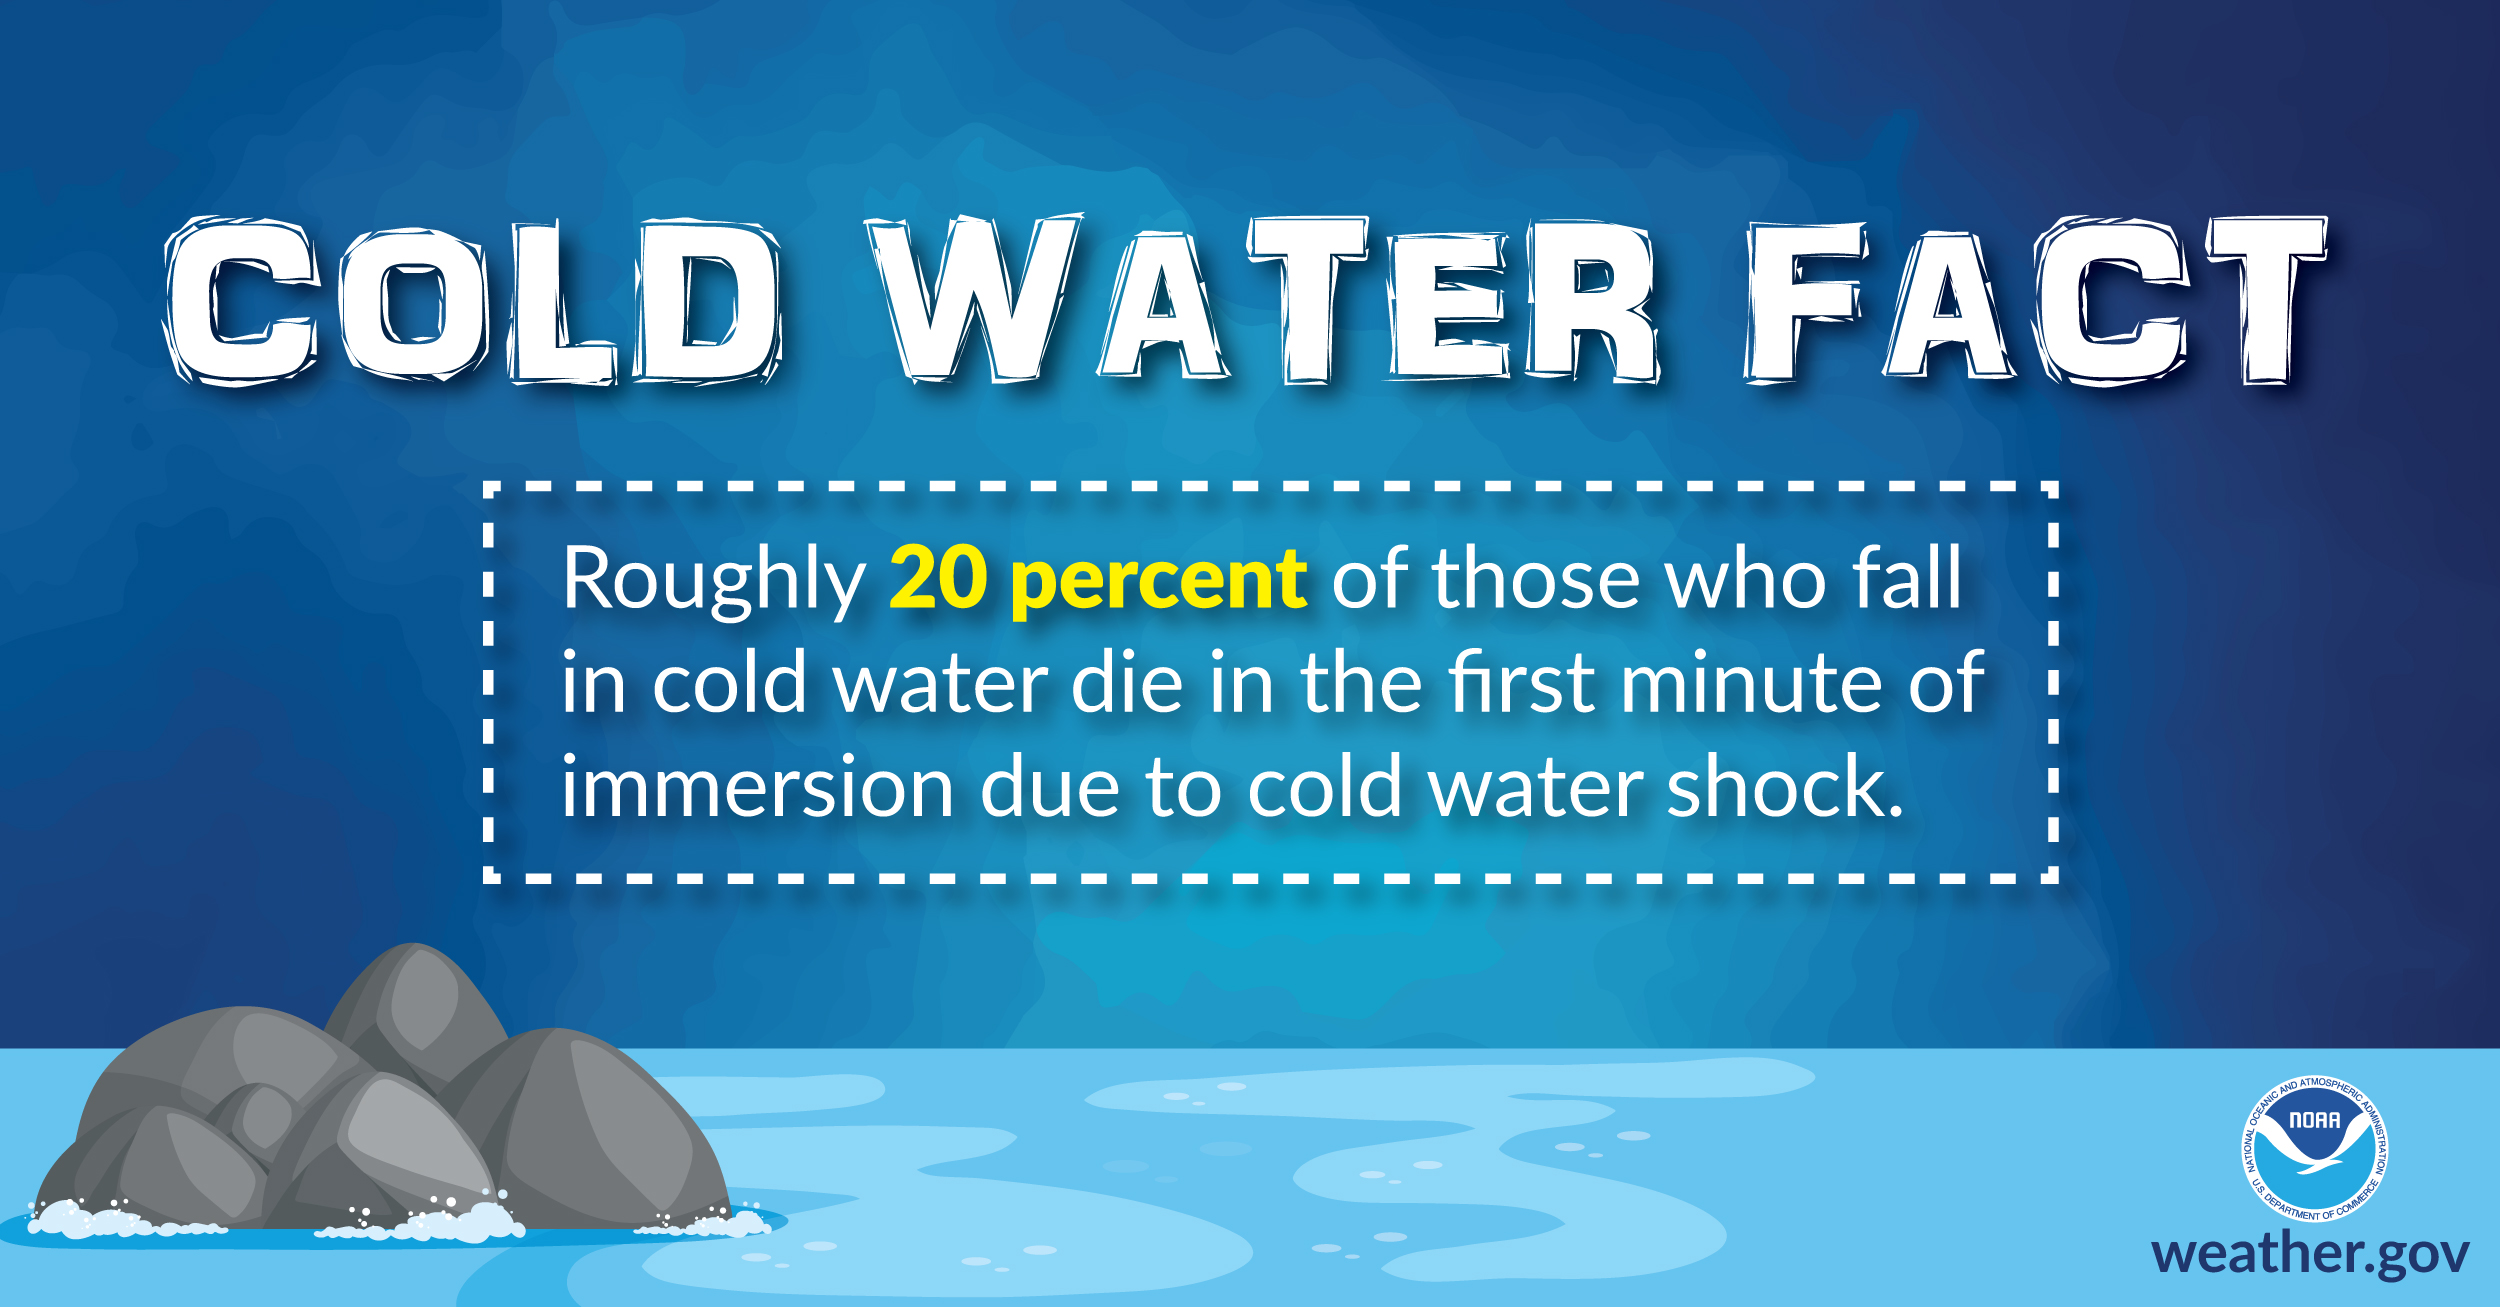 Cold Water Fact: roughly 20 percent of those who fall in cold water die in the first minute of immersion due to cold water shock.